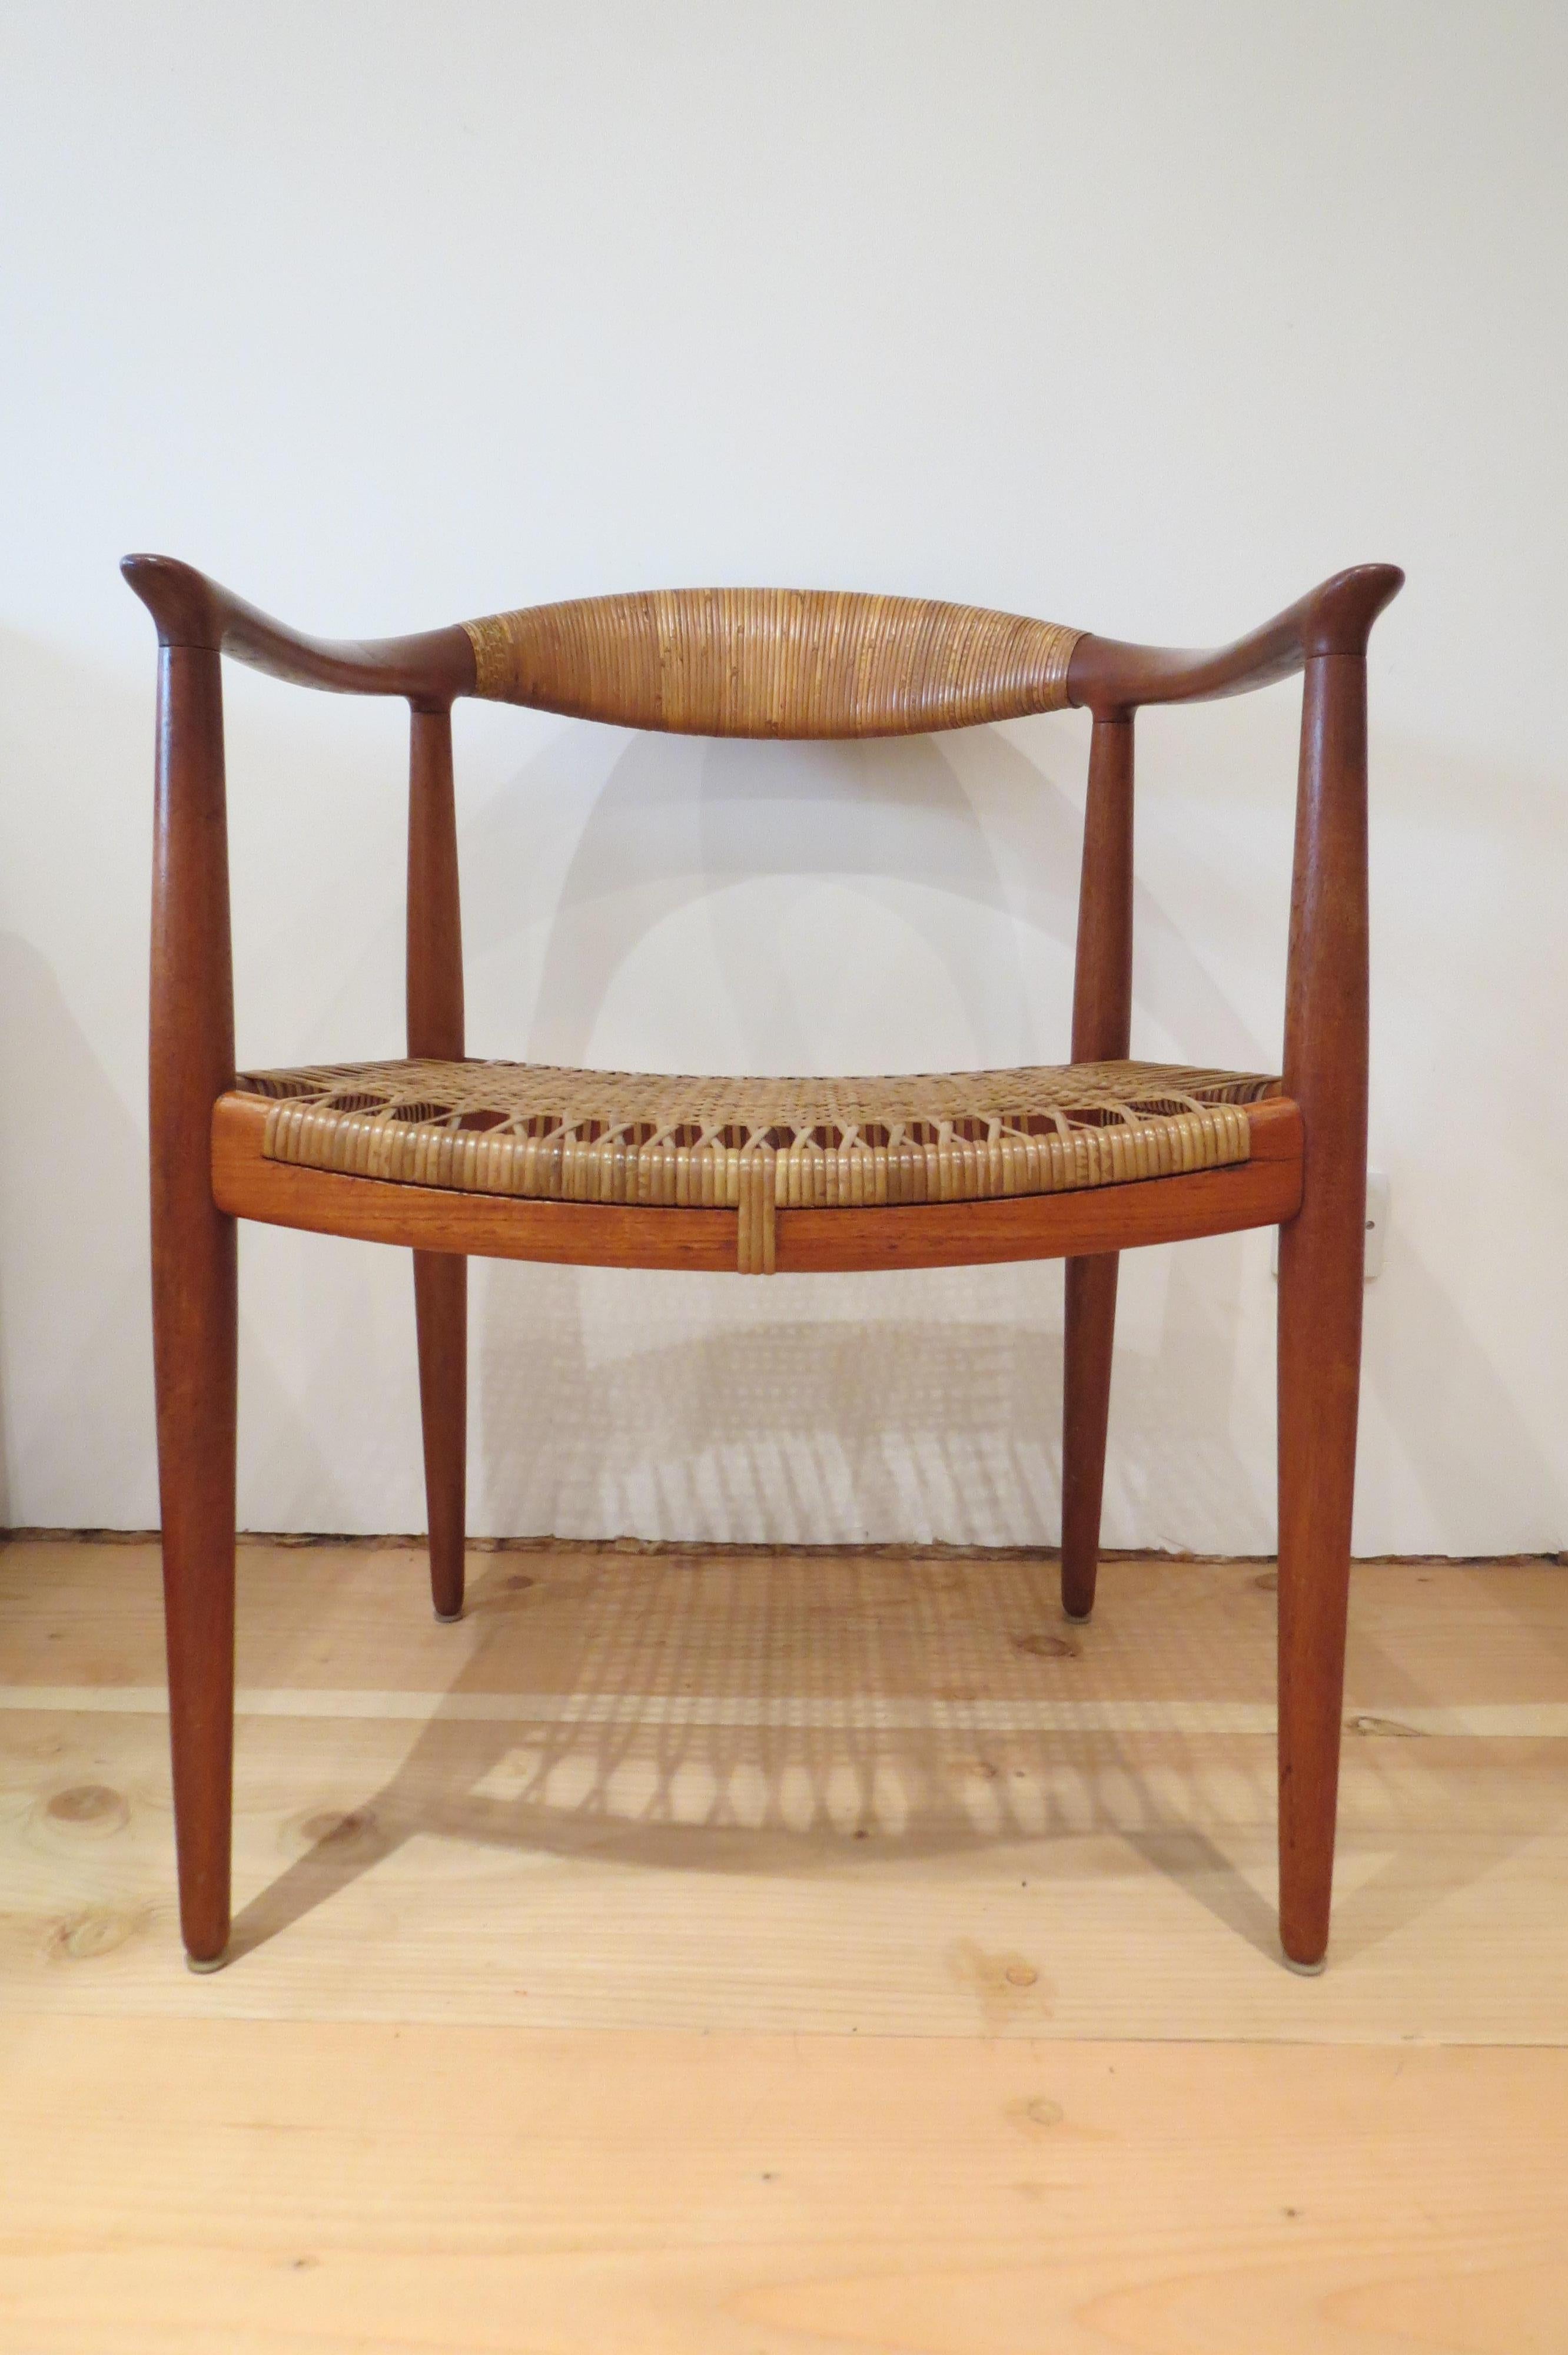 Early original JH 501 chair by Hans J Wegner for Johannes Hansen, 1950.

An original very early edition that dates between 1949 and 1951 of the chair by Hans J Wegner. The chair was designed in 1949, so this is a very early edition of this